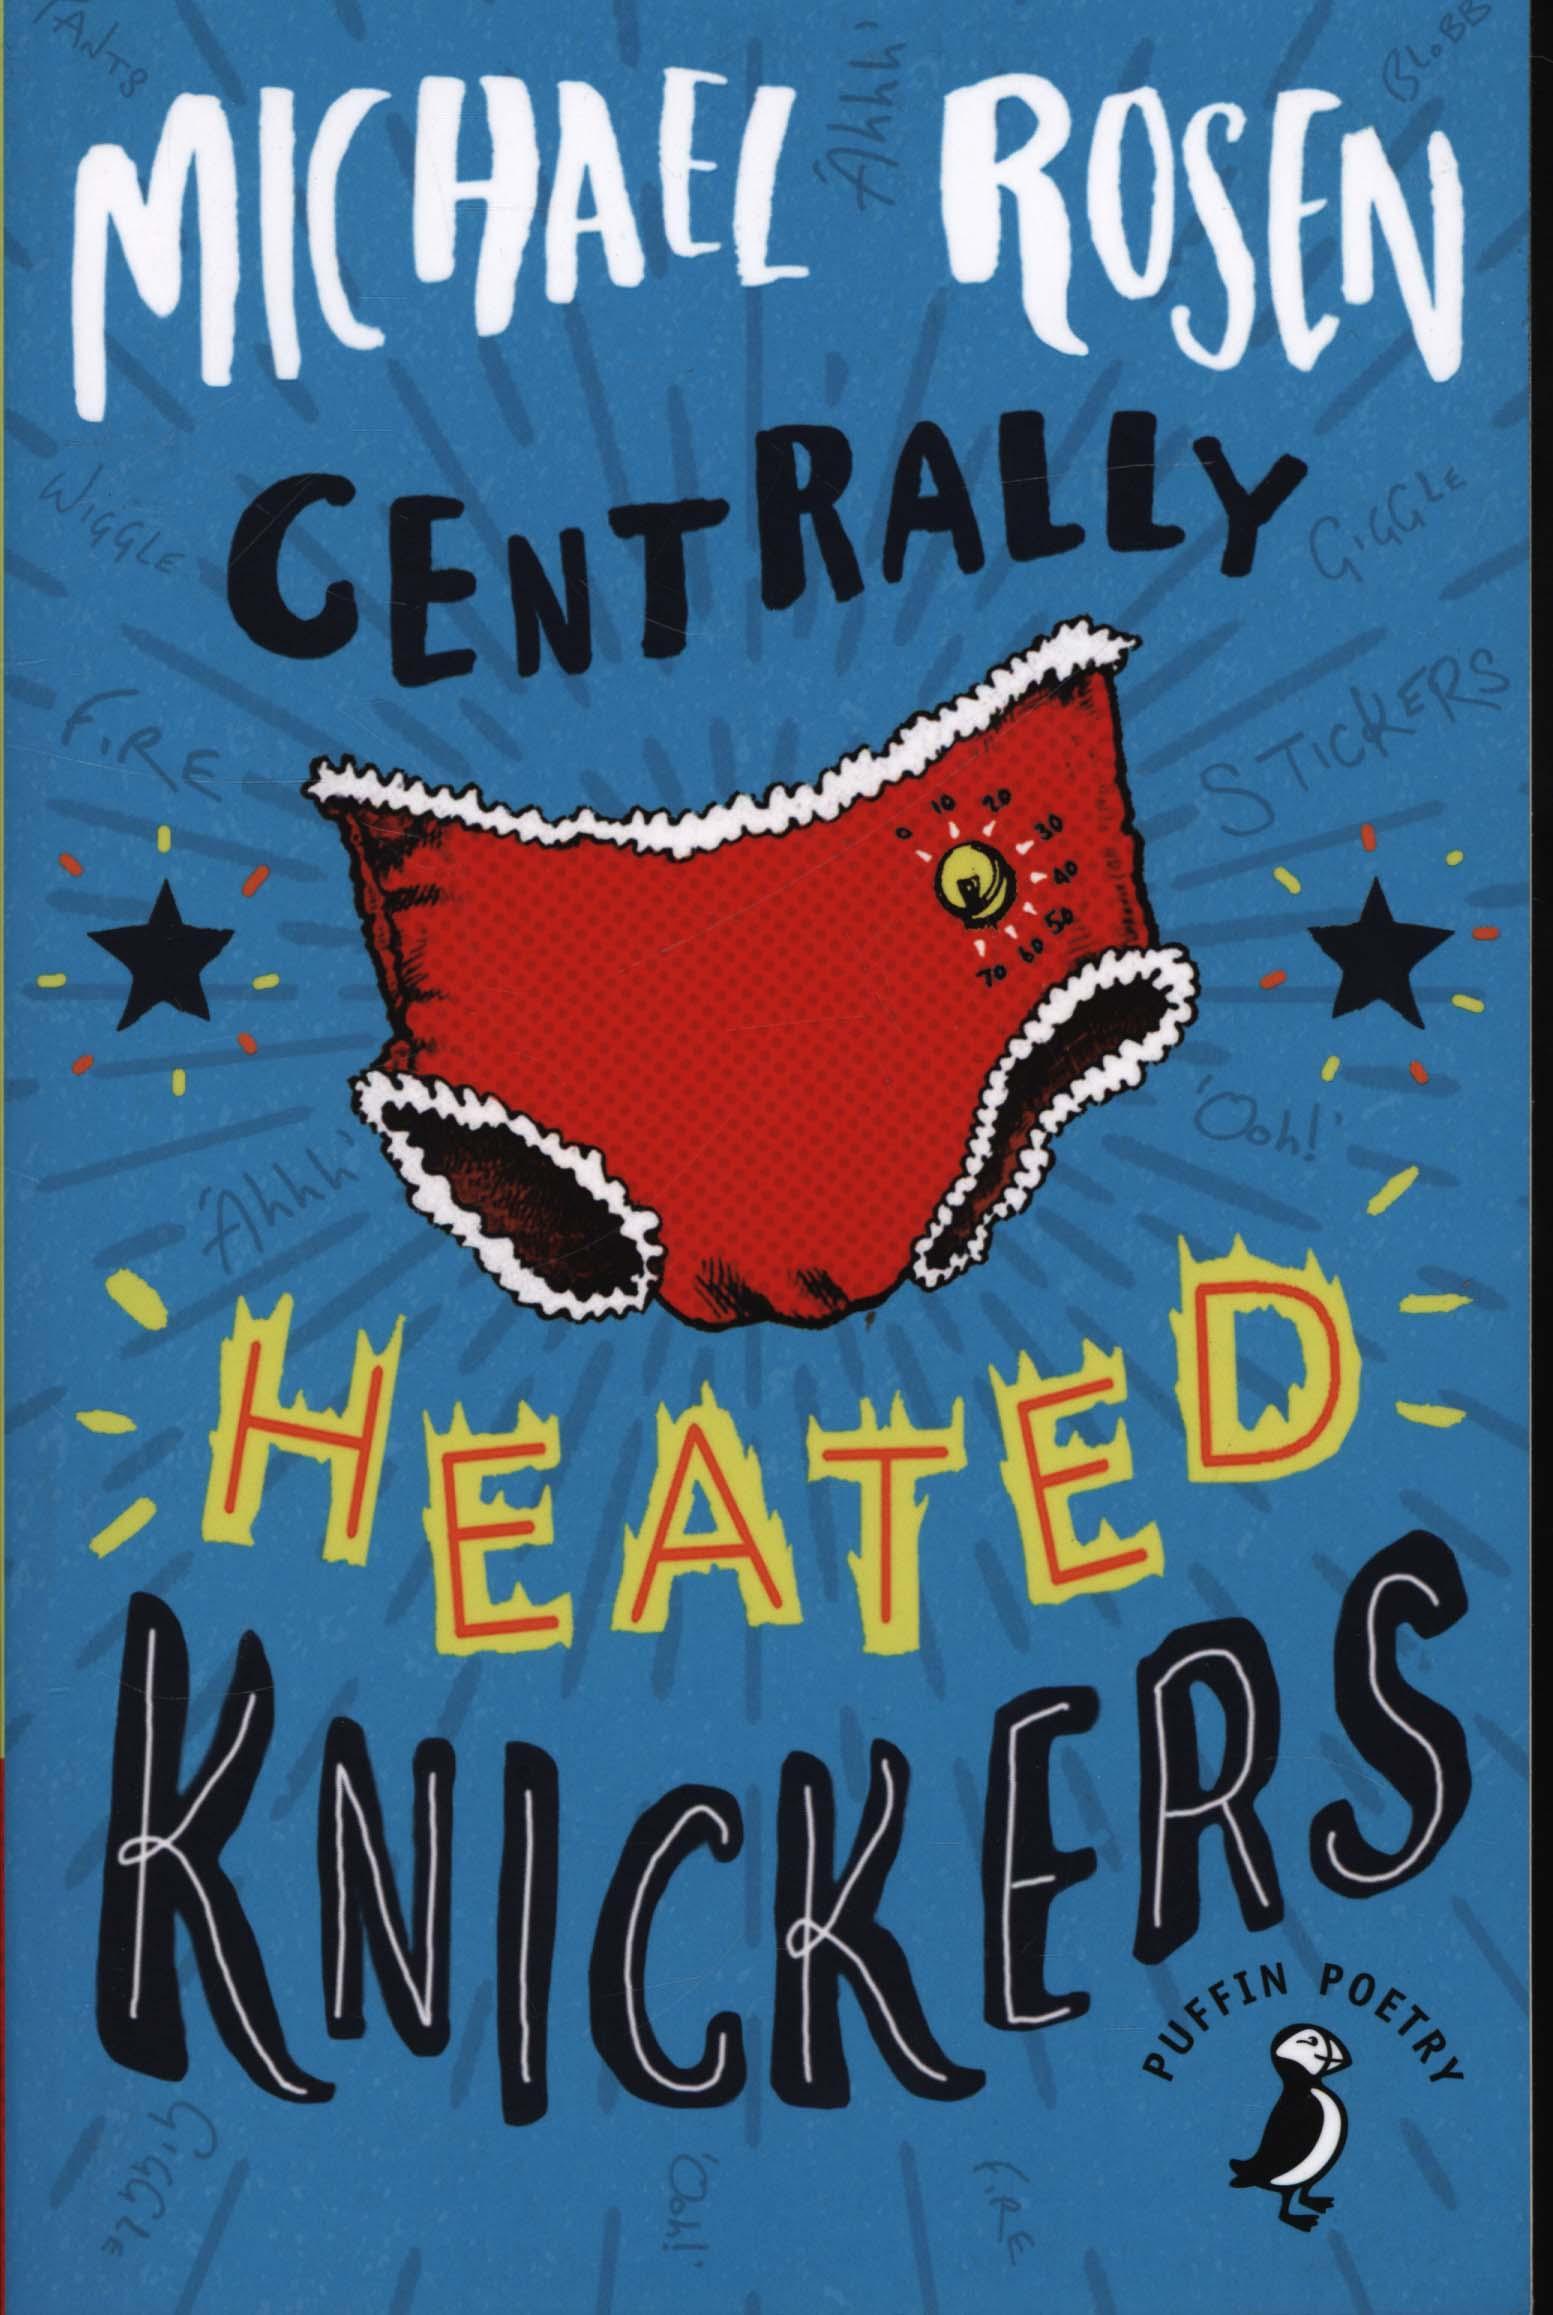 Centrally Heated Knickers